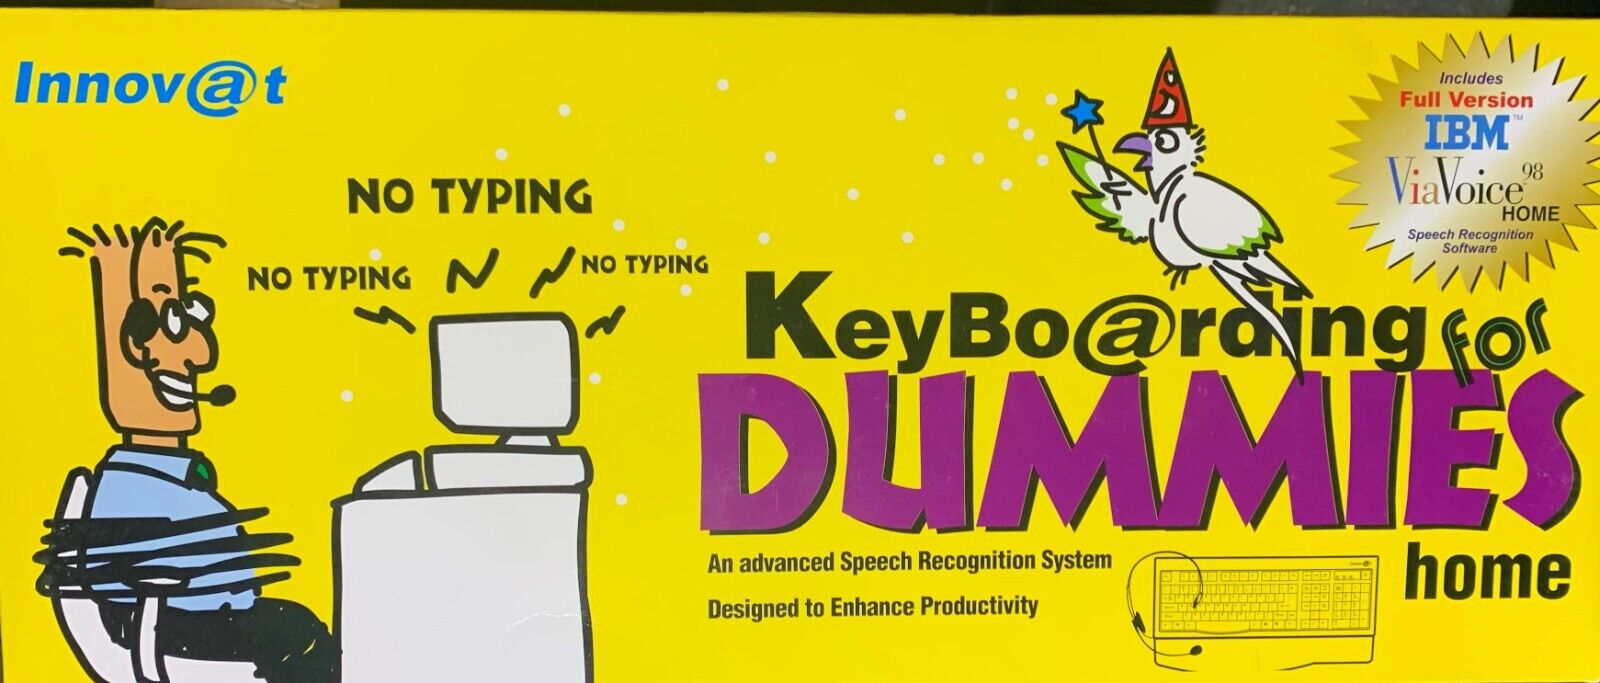 Innovat IBM Keyboarding for Dummies VIA VOICE 98 Home Office, Voice Typing